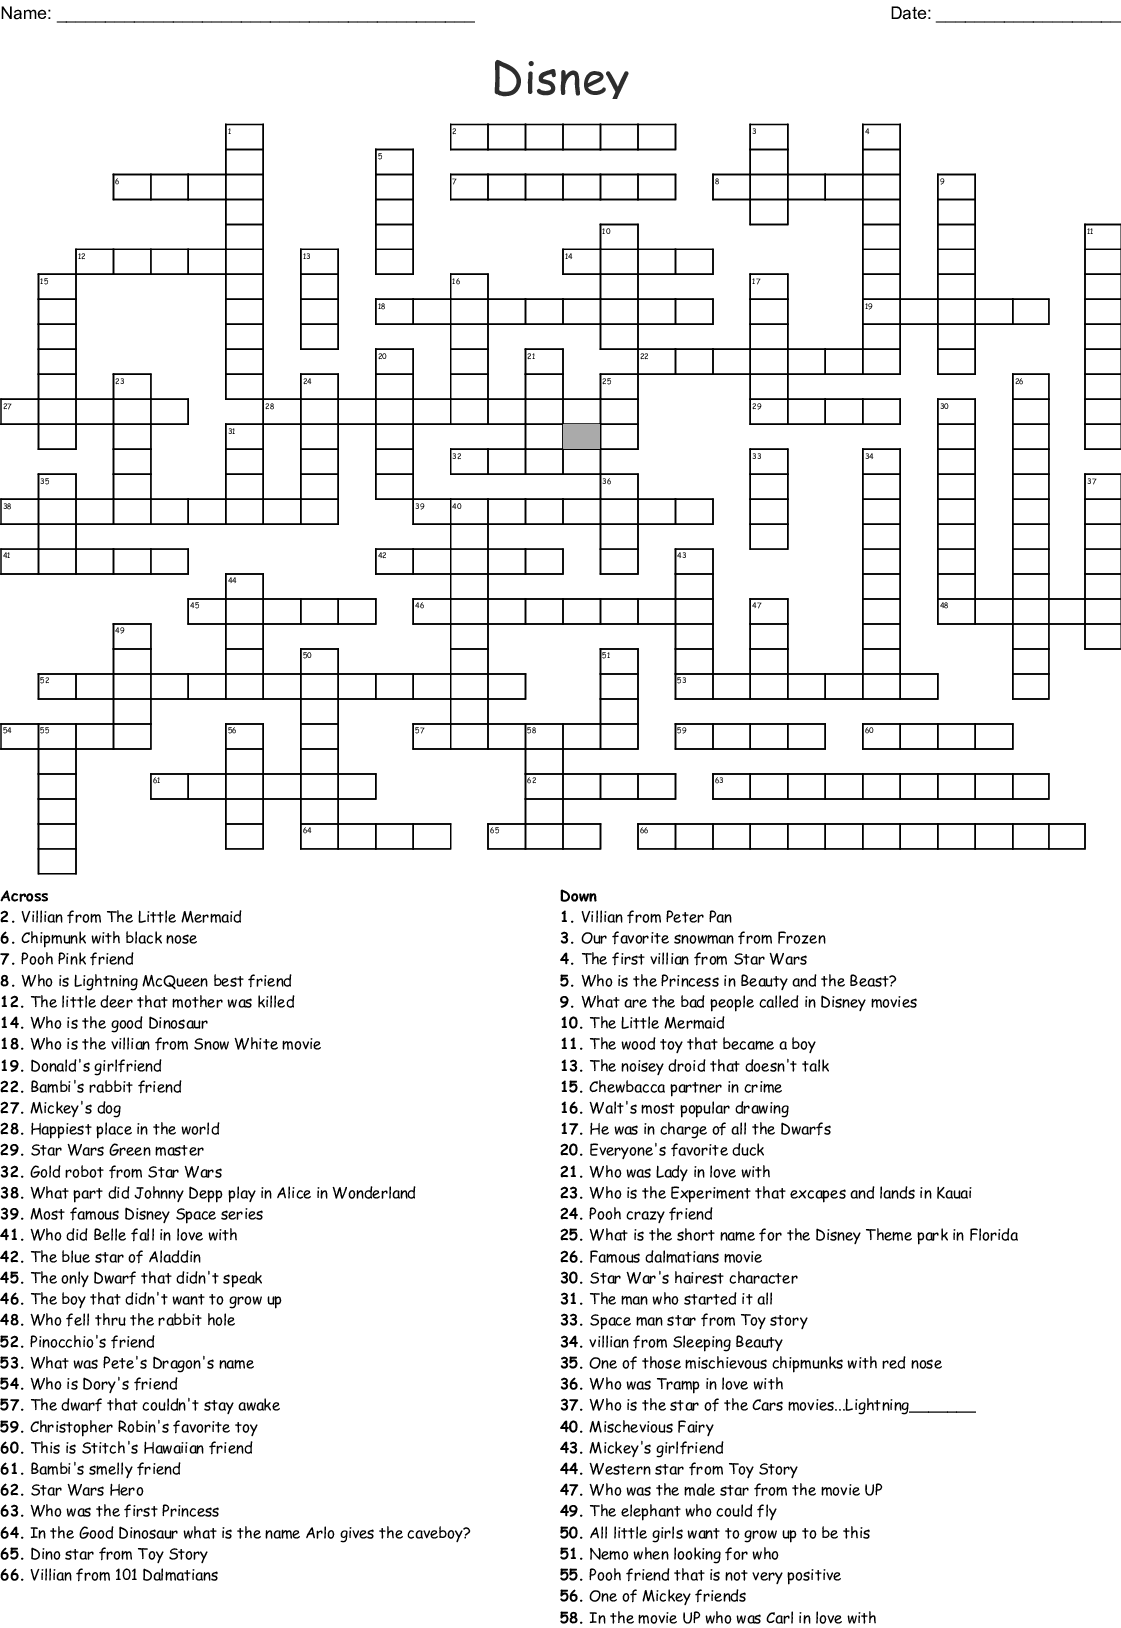 Printable Disney Crossword Puzzles For Adults